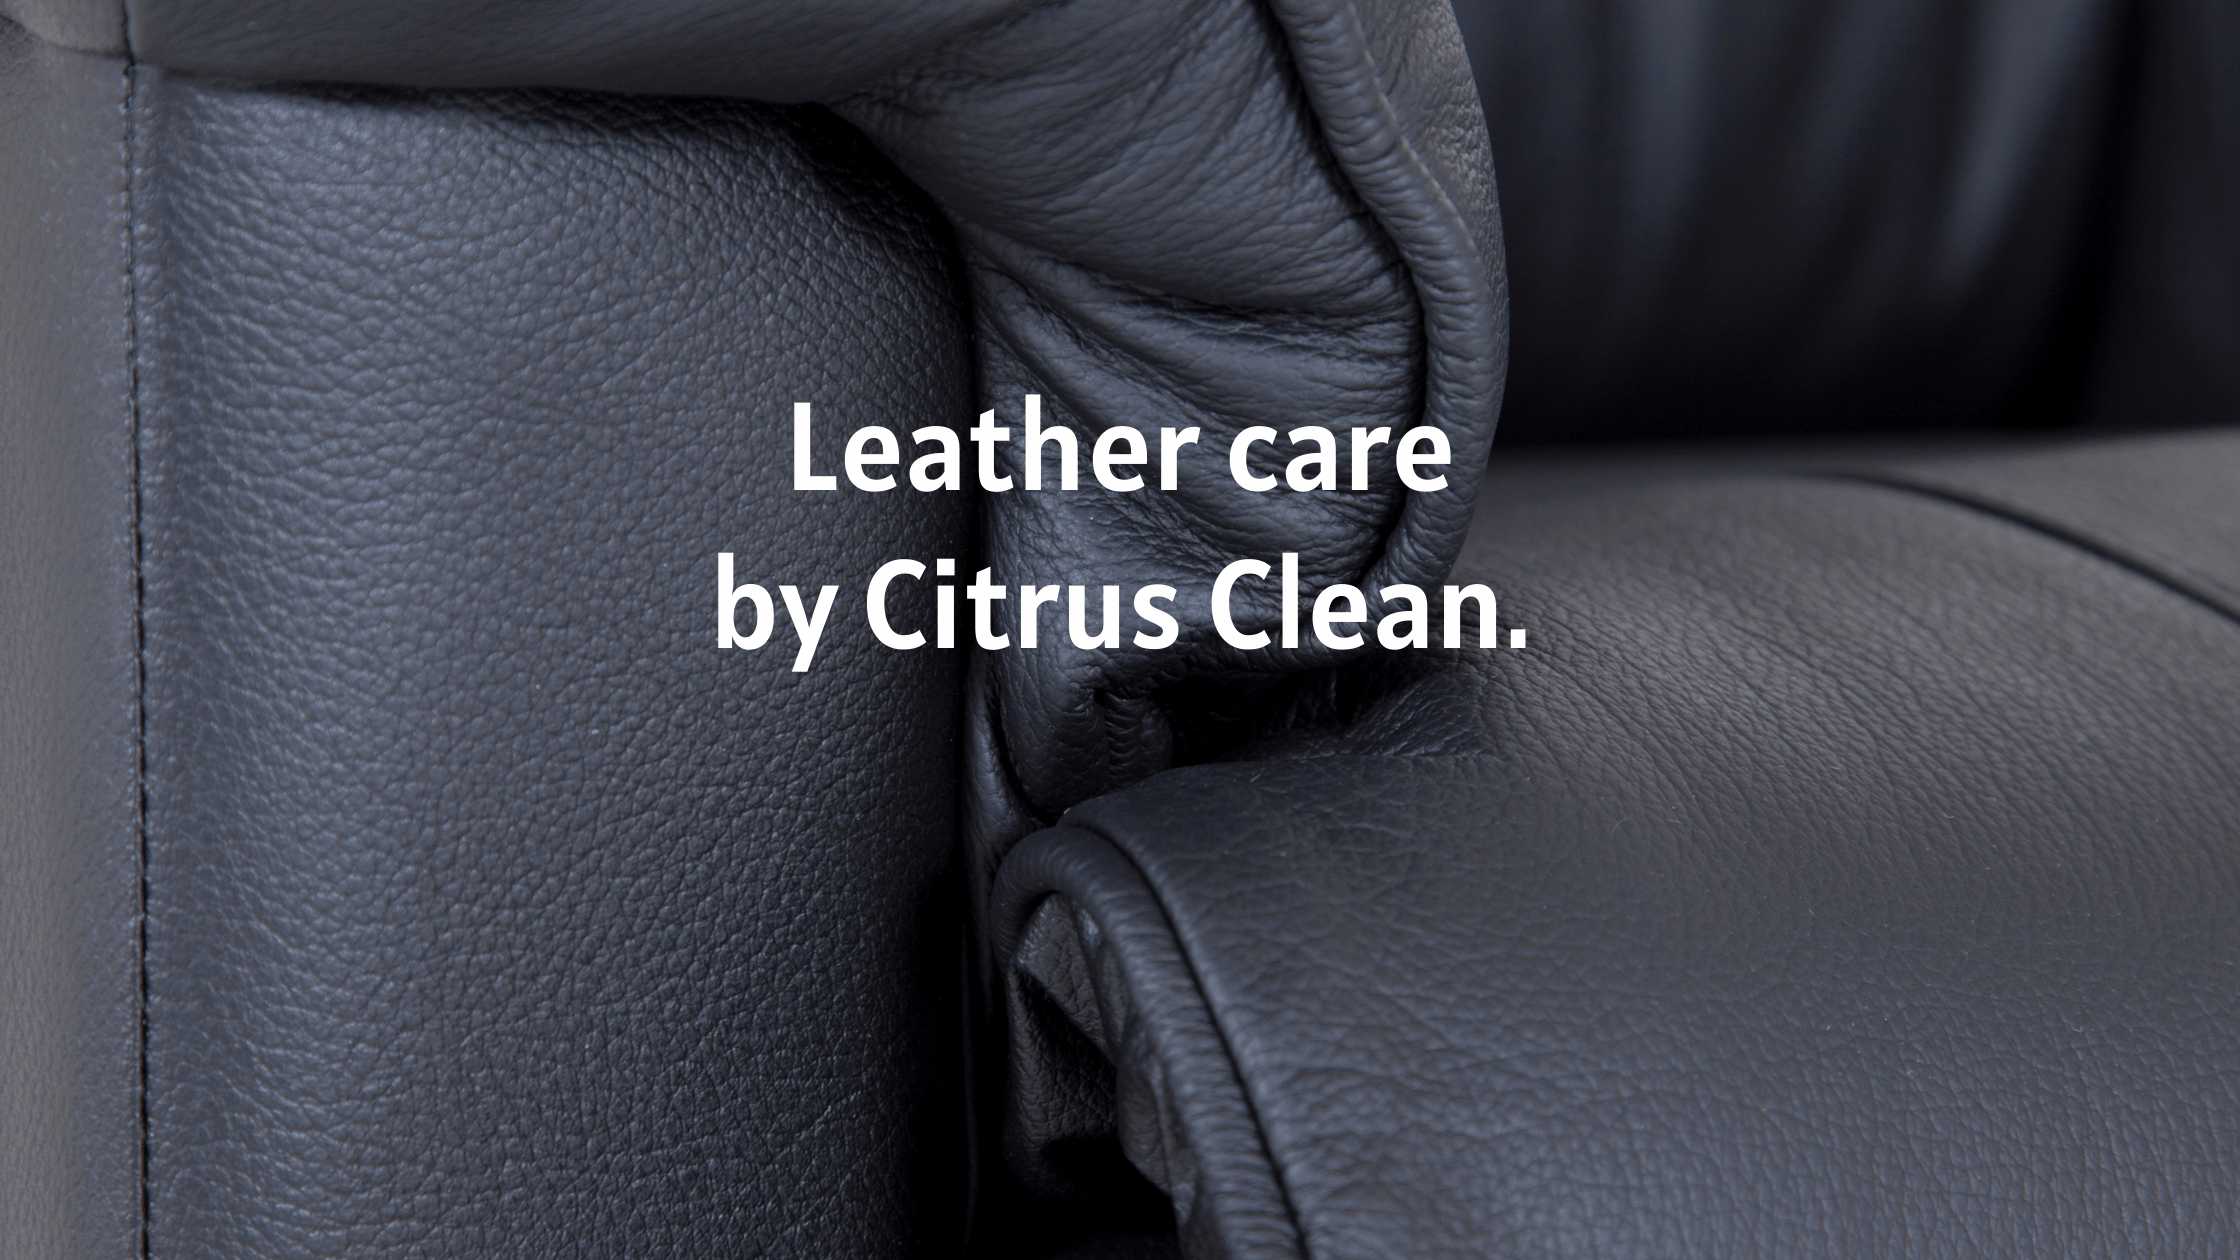 Introducing Leather care by Citrus Clean 1